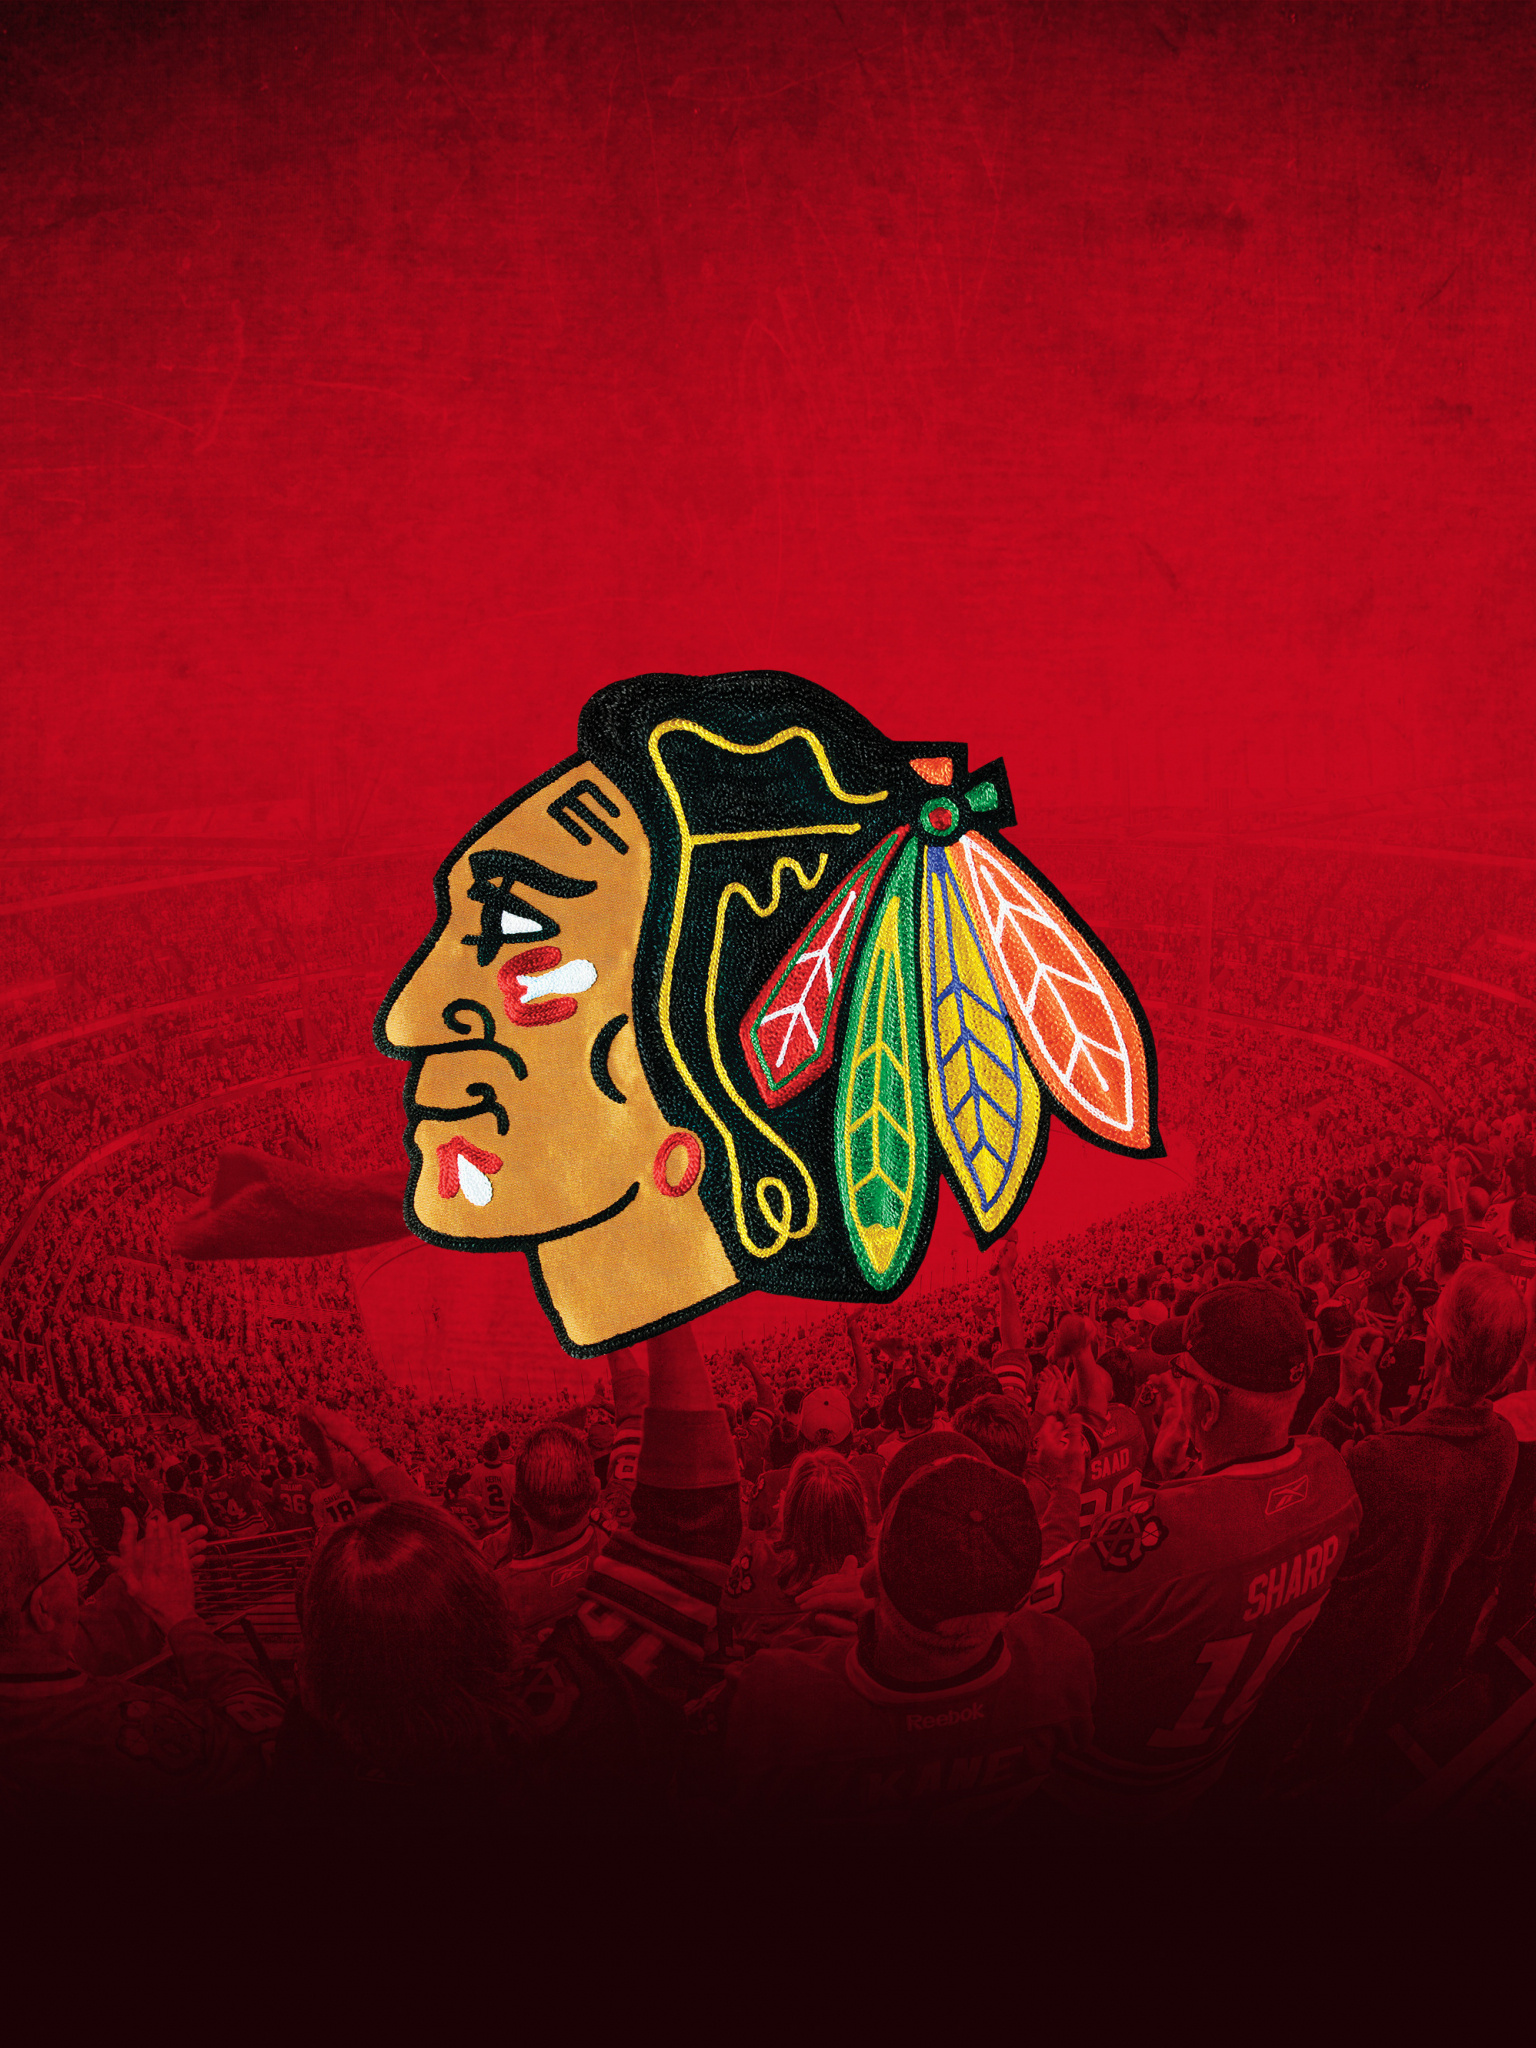 Chicago Blackhawks: Original Six hockey club founded on Sept. 25, 1926, when the National Hockey League awarded a franchise to Major Frederic McLaughlin. 1540x2050 HD Wallpaper.